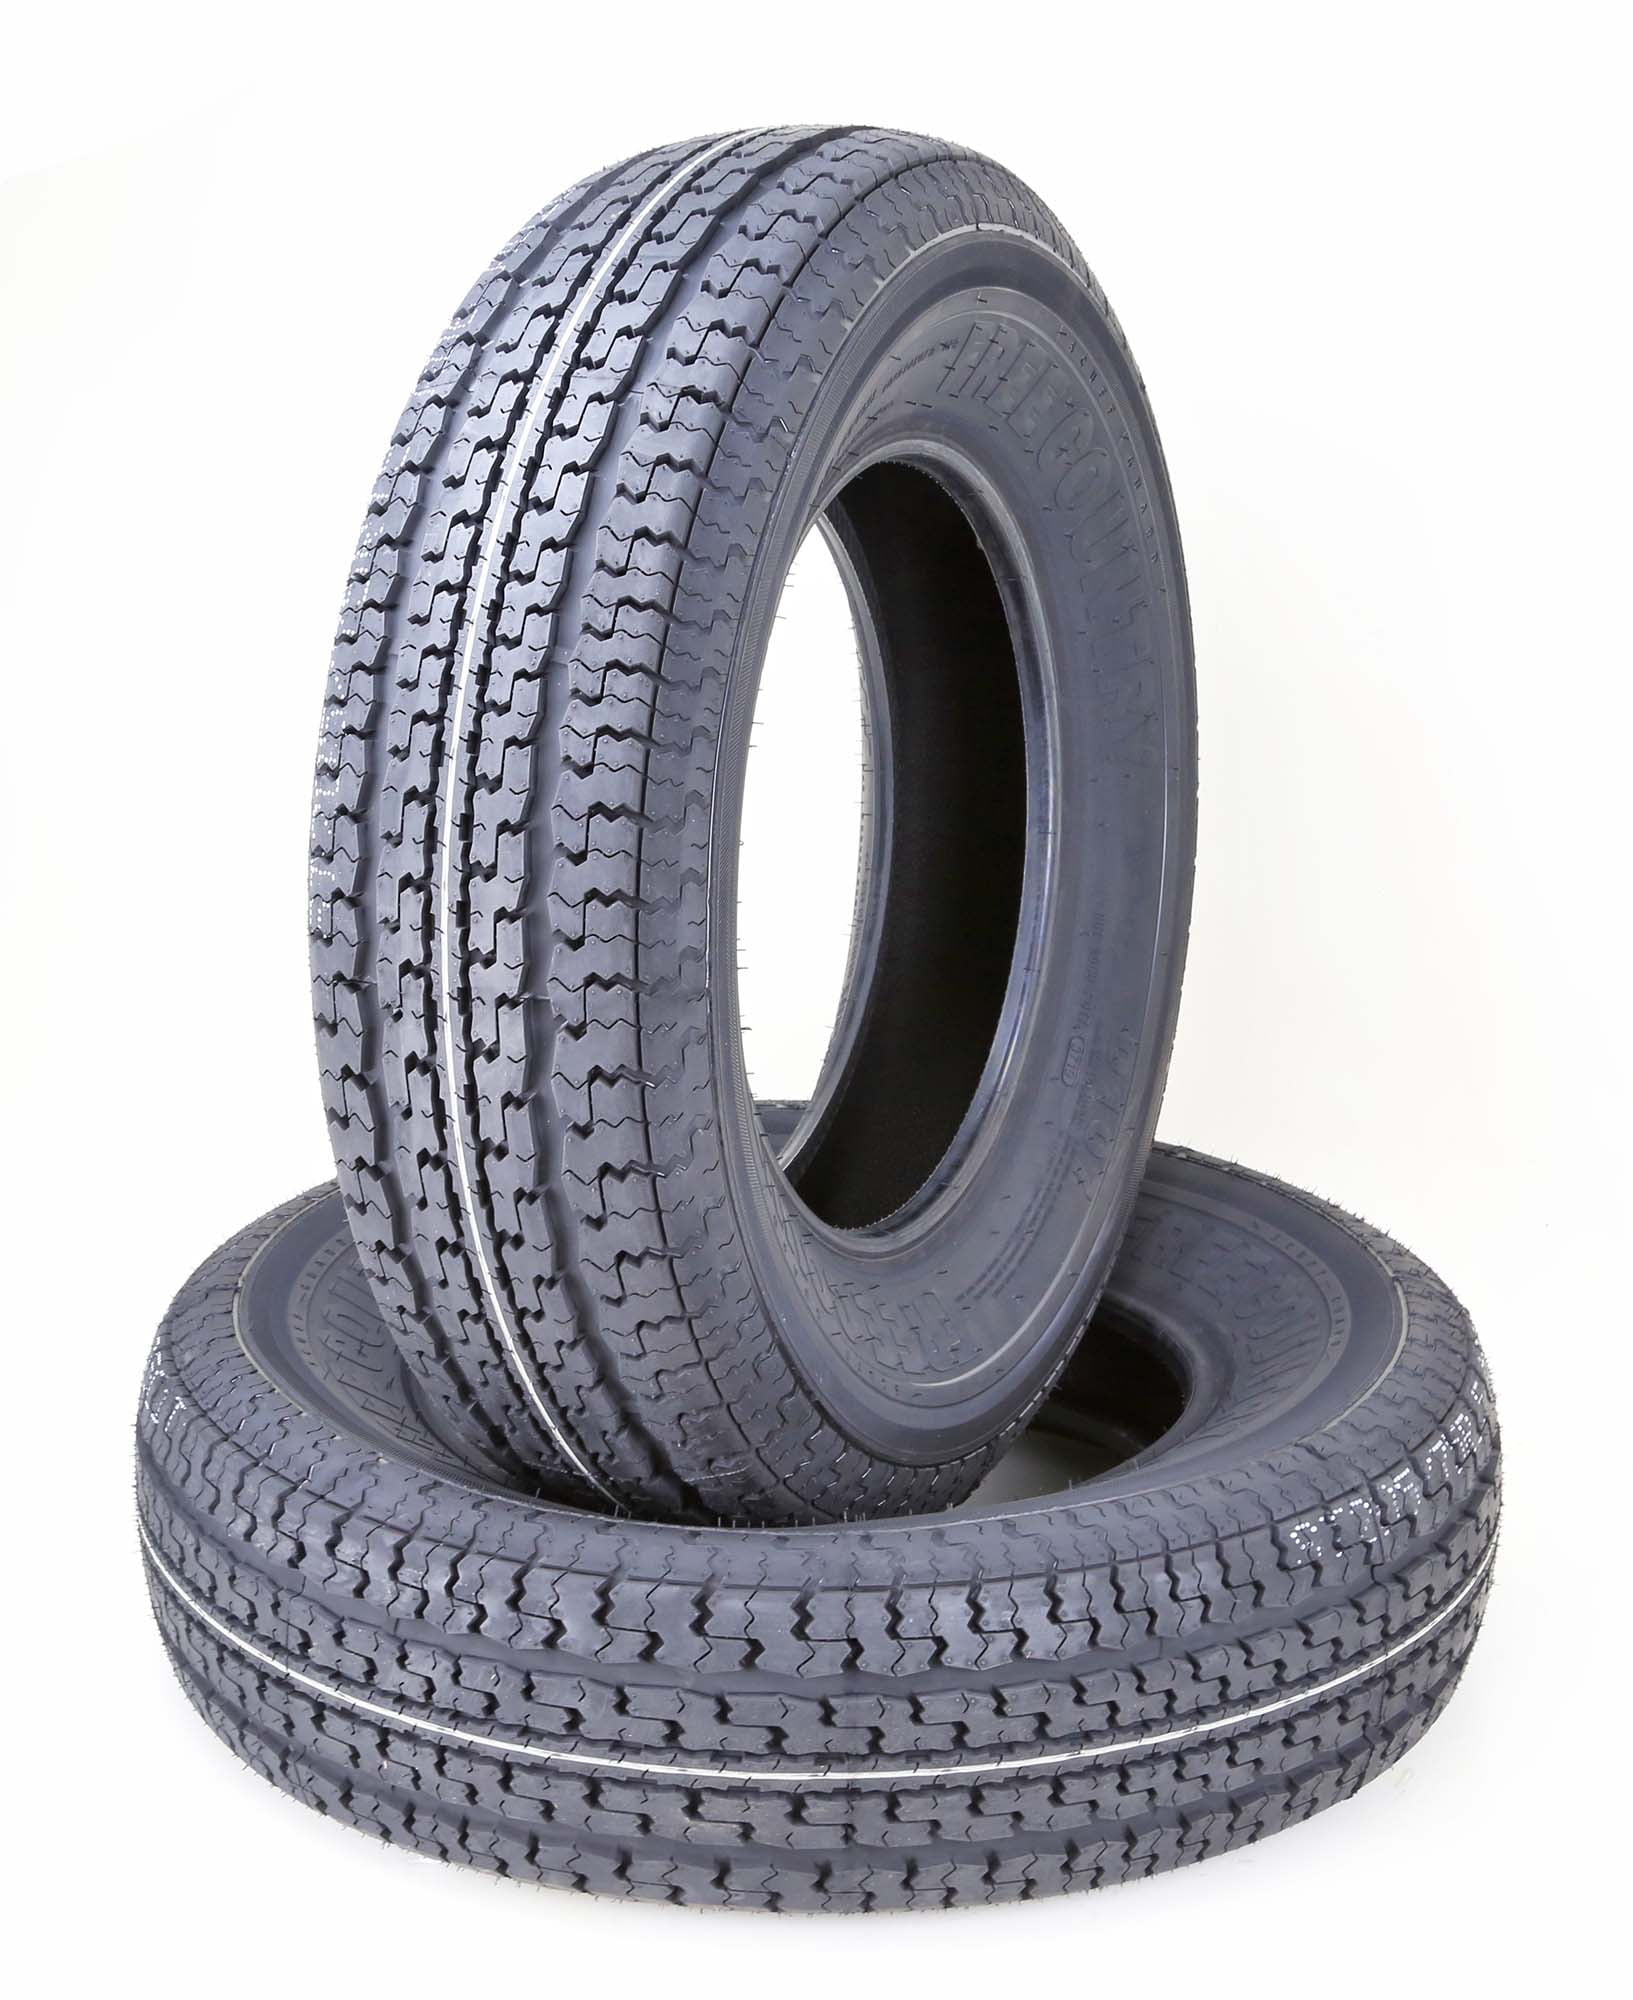 10PR load range E radial trailer tires ST205/75R15 are steel belted and wit...